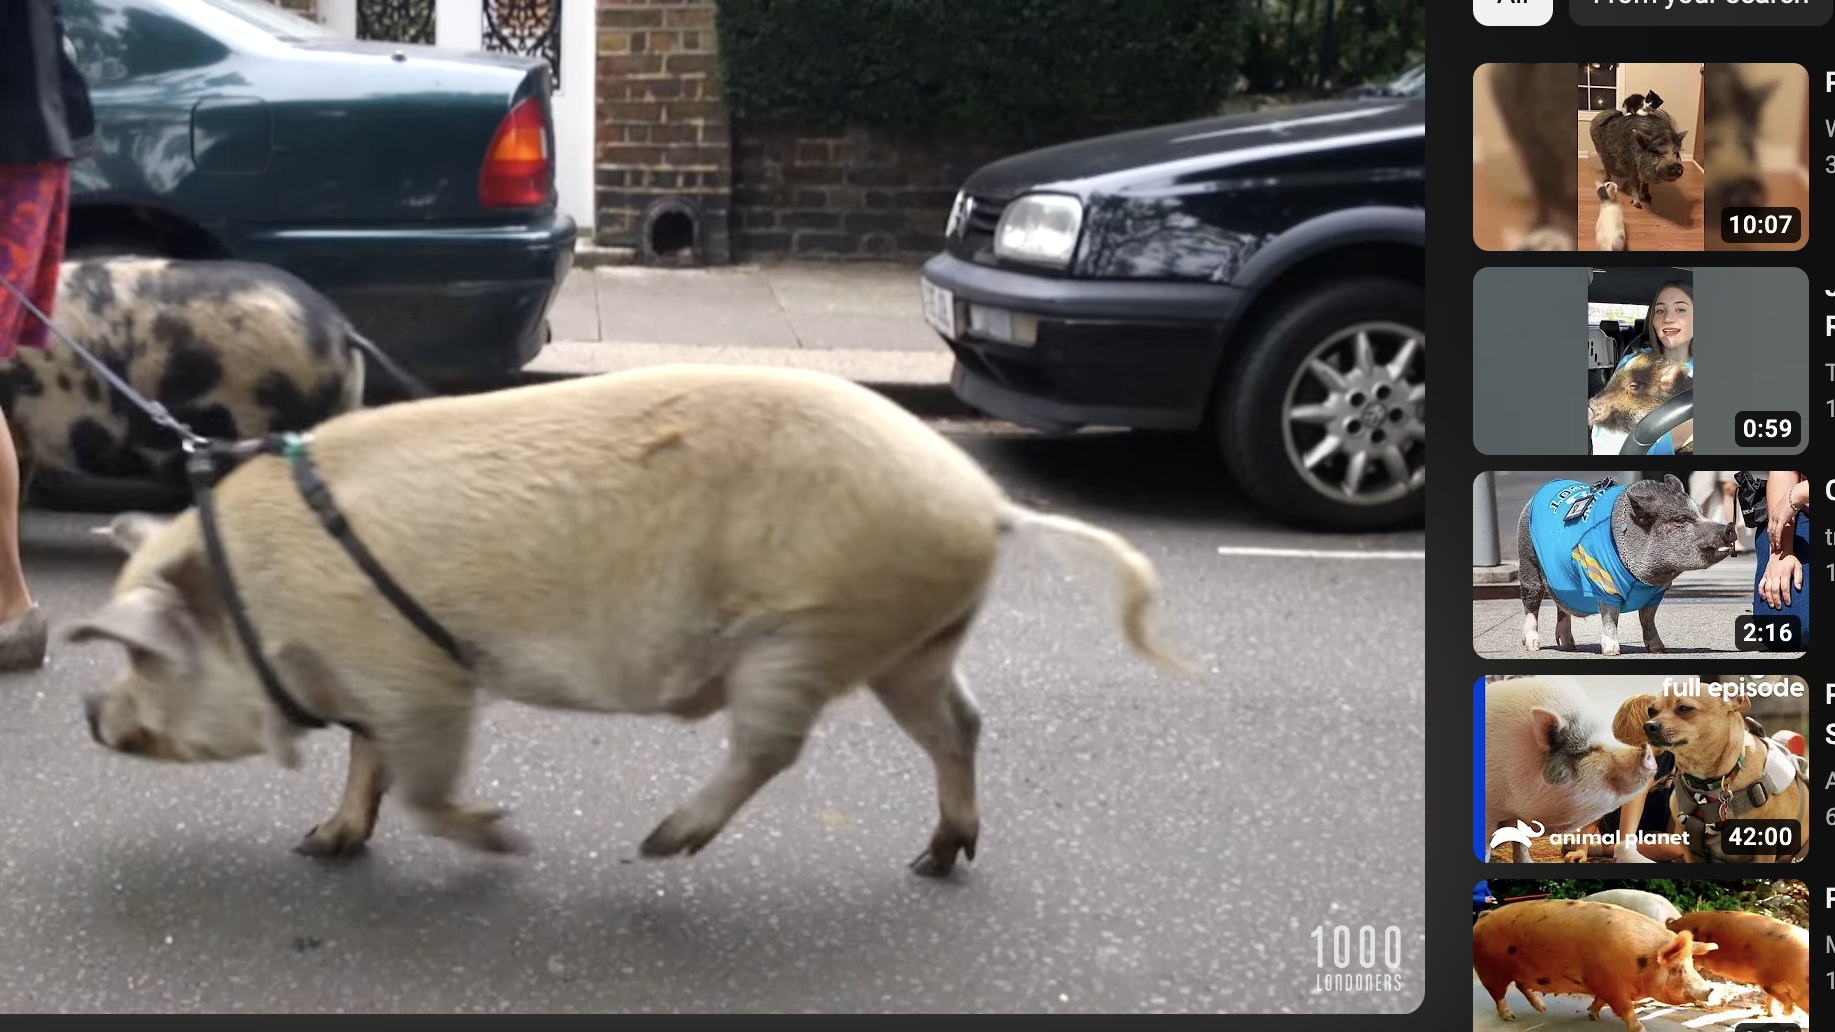 A woman is walking her two pigs down the street